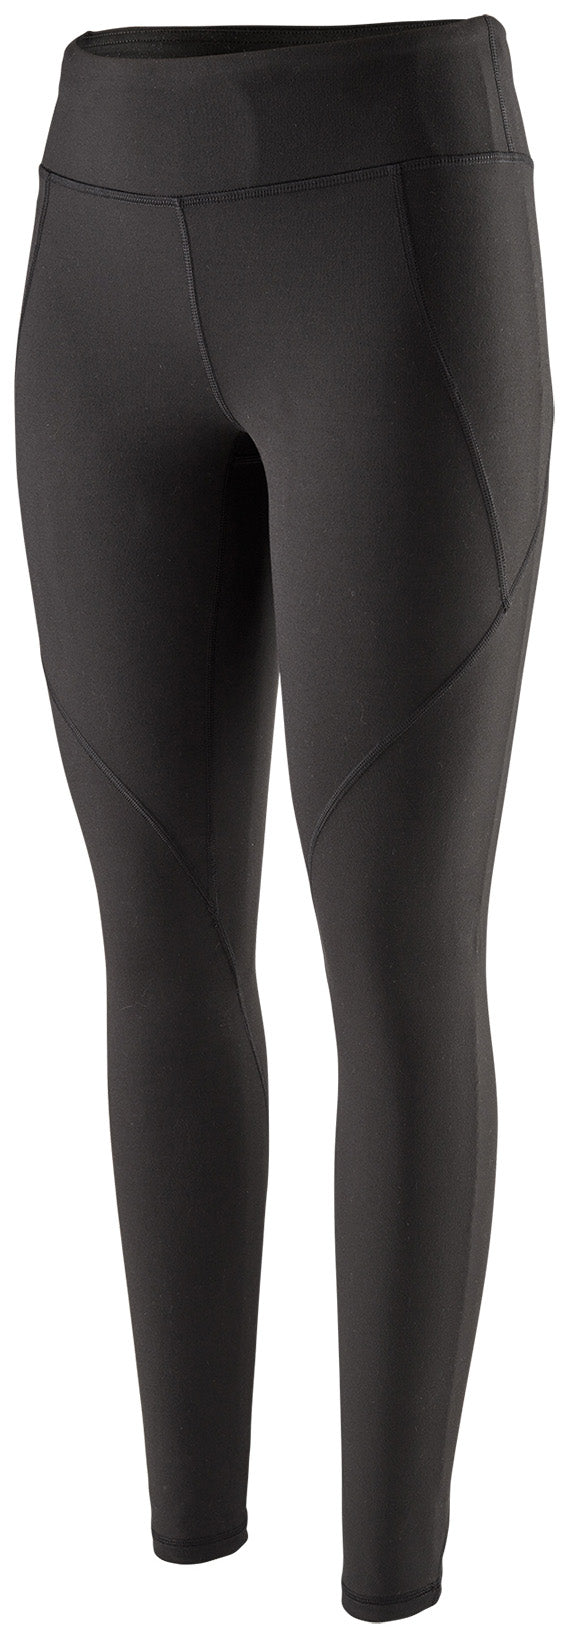 🔥Patagonia Centered Tights Leggings🔥~small